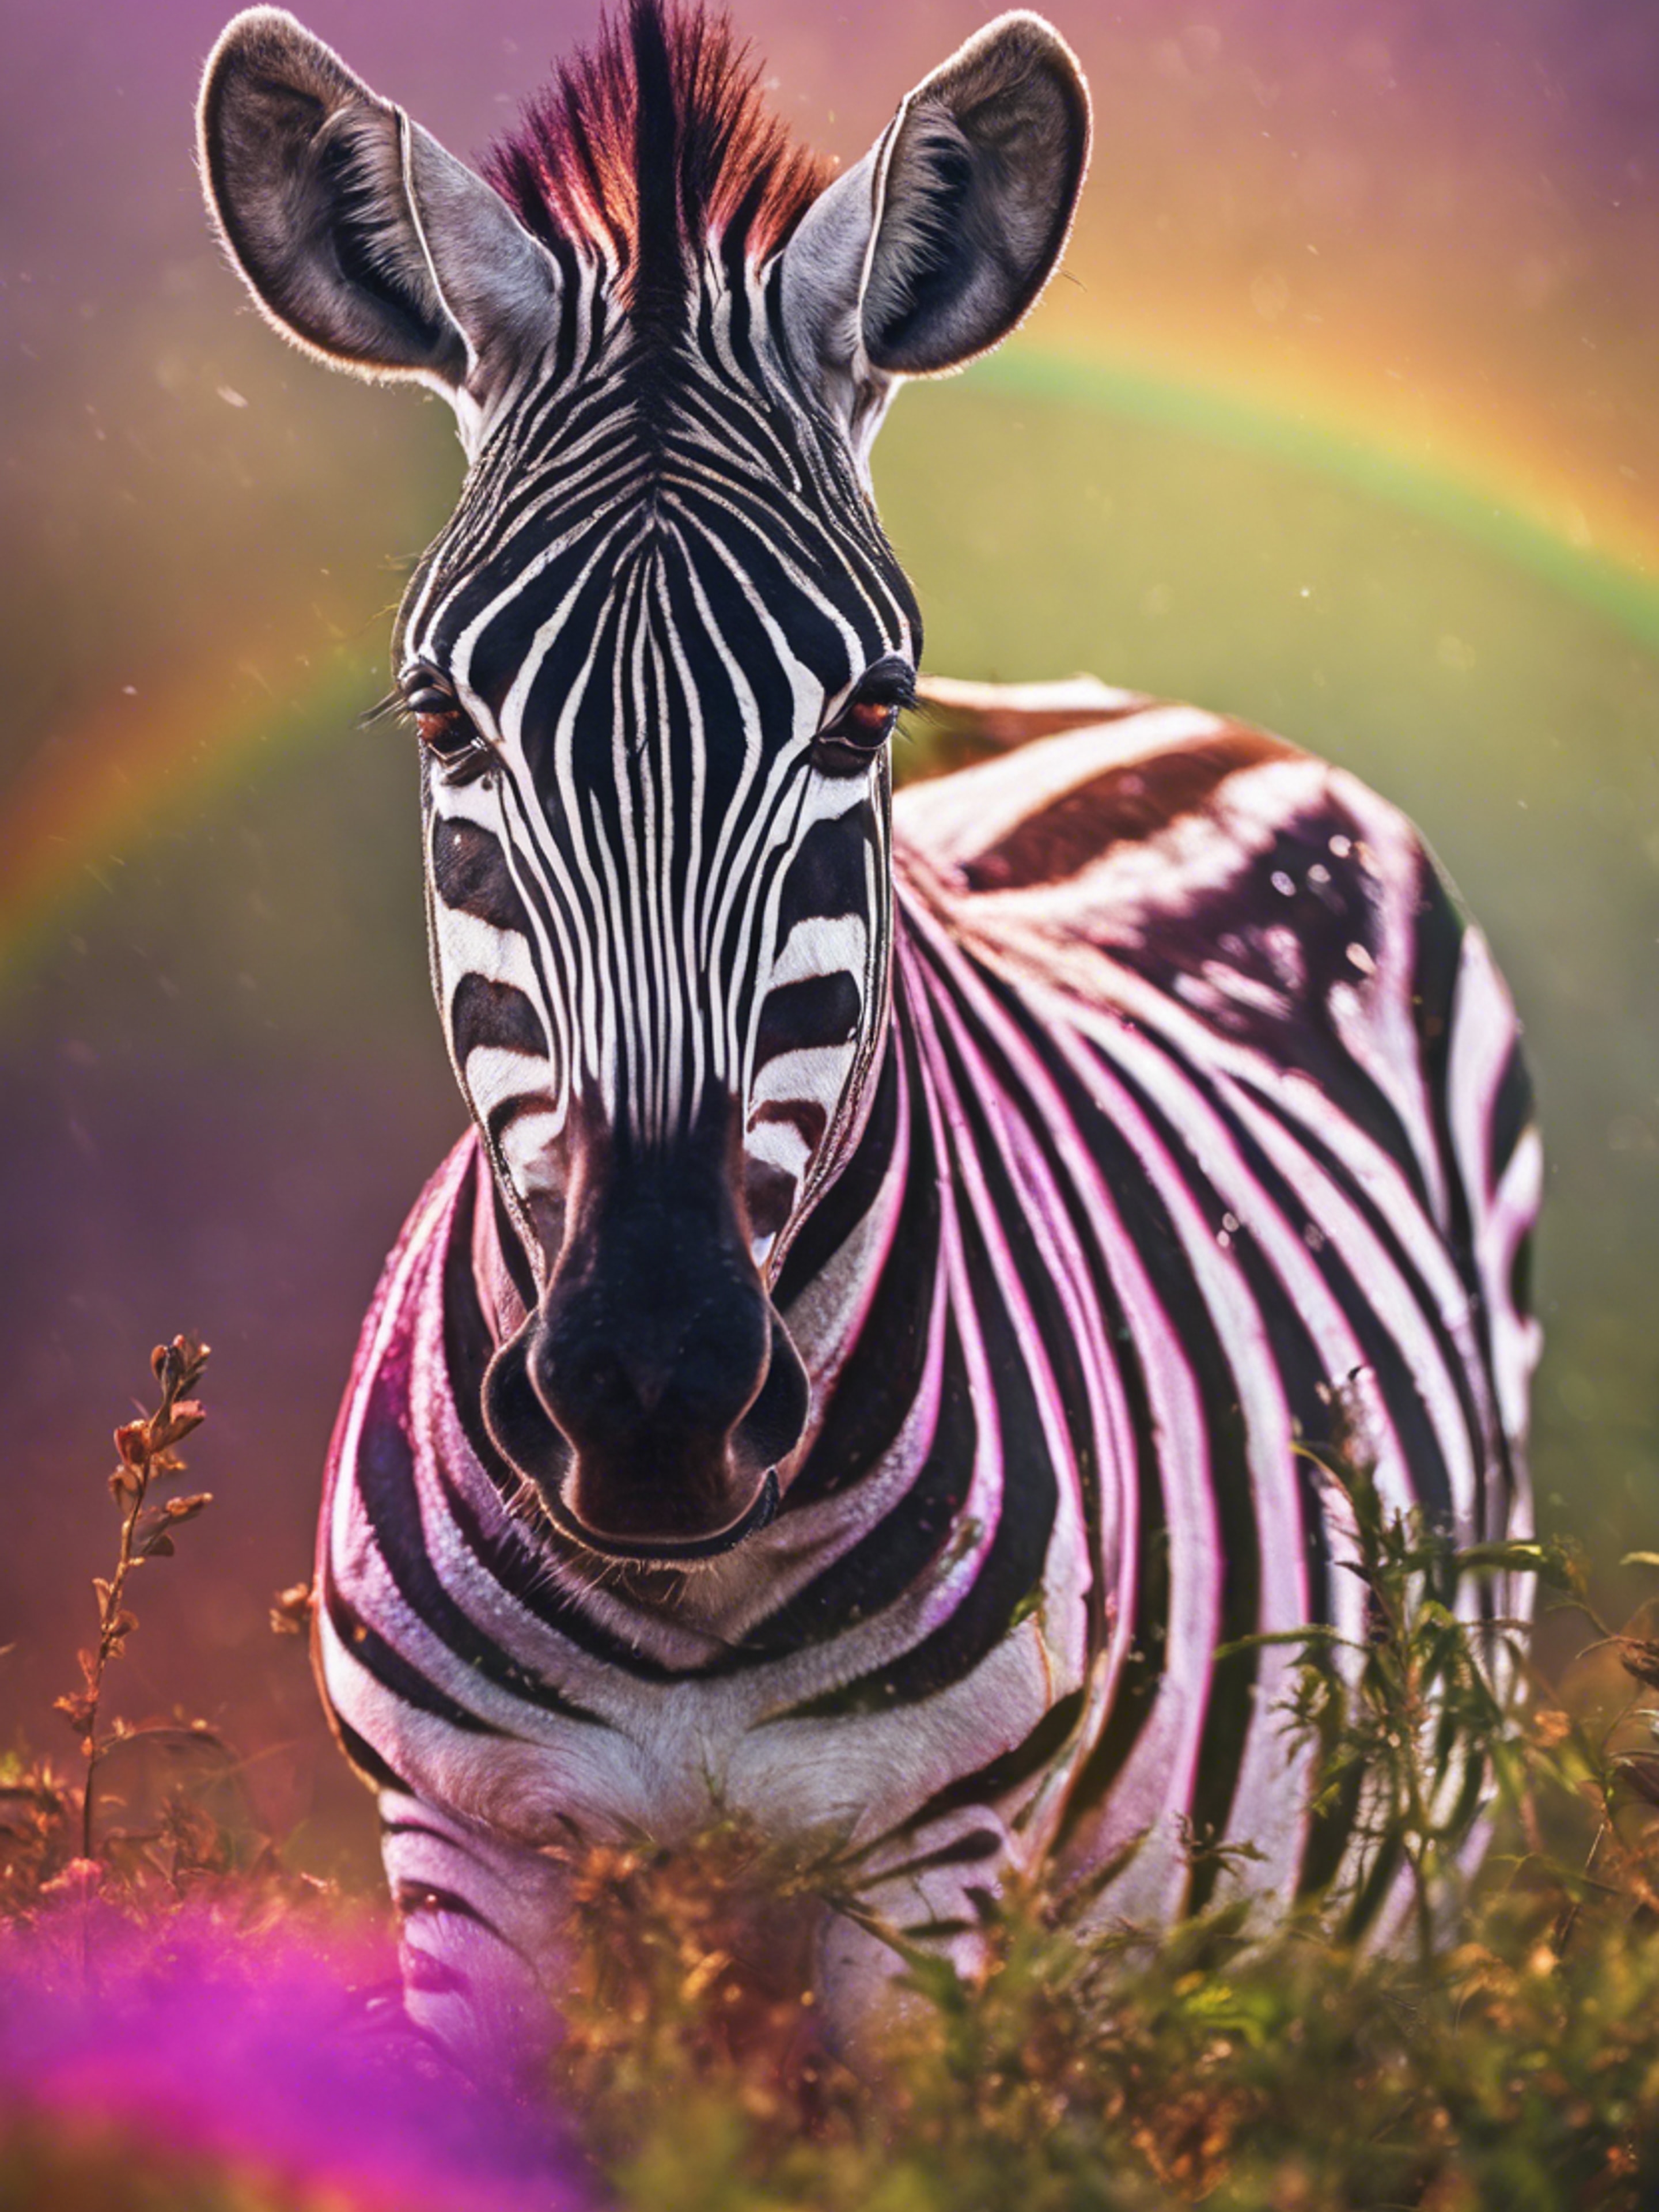 A zebra in the African wild under a vibrant rainbow after a short rain shower. Обои[a984eacdffd5482bb541]